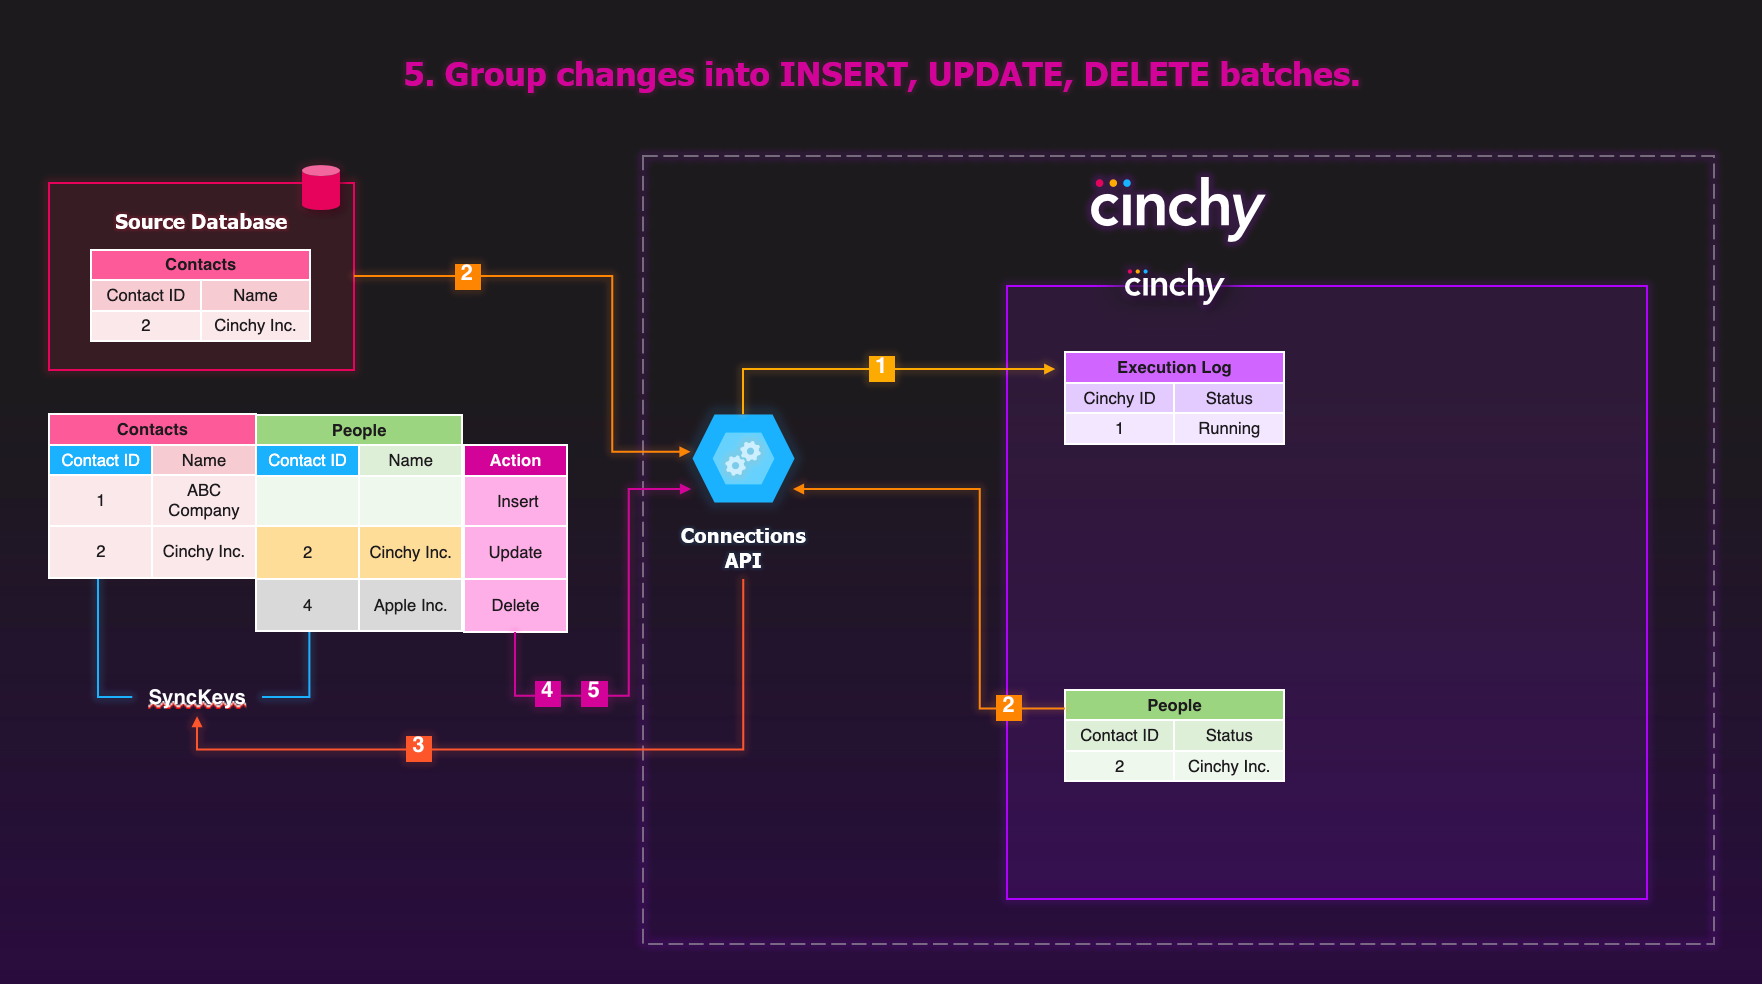 For the records where there are changes, groups them into insert, update, and delete batches.